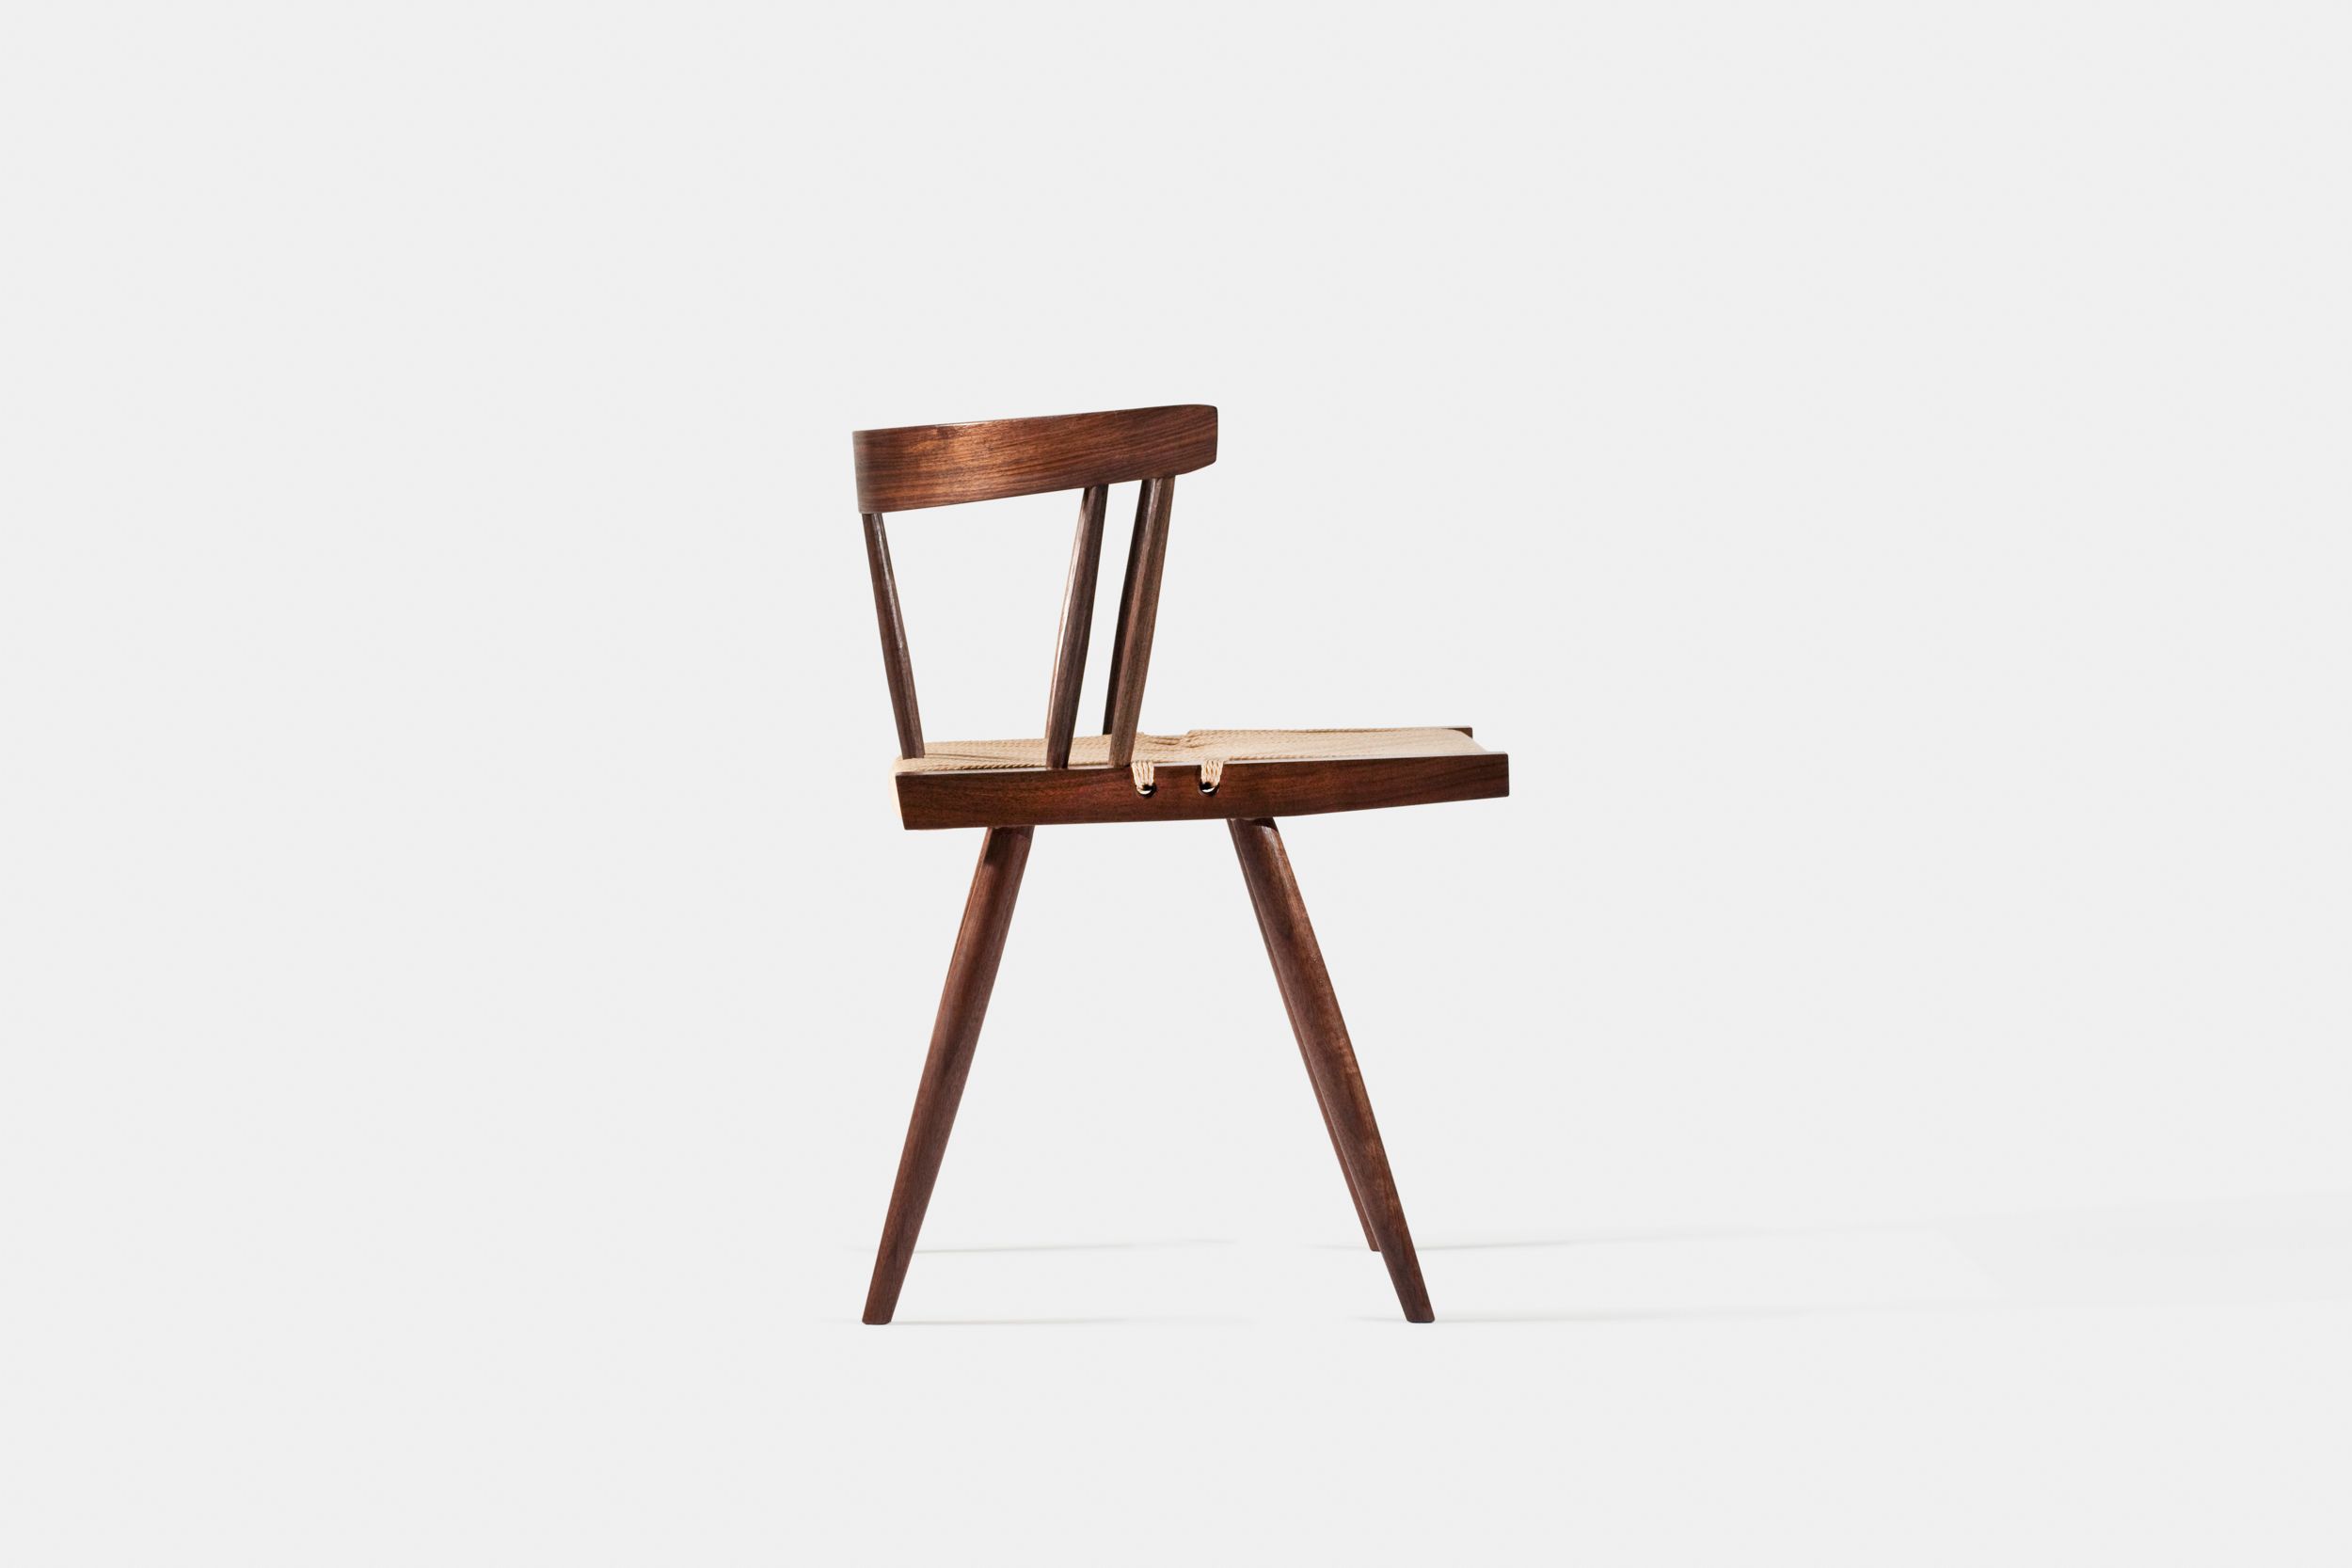 Grass Seated Chair with Danish Cord_3 copy.jpg